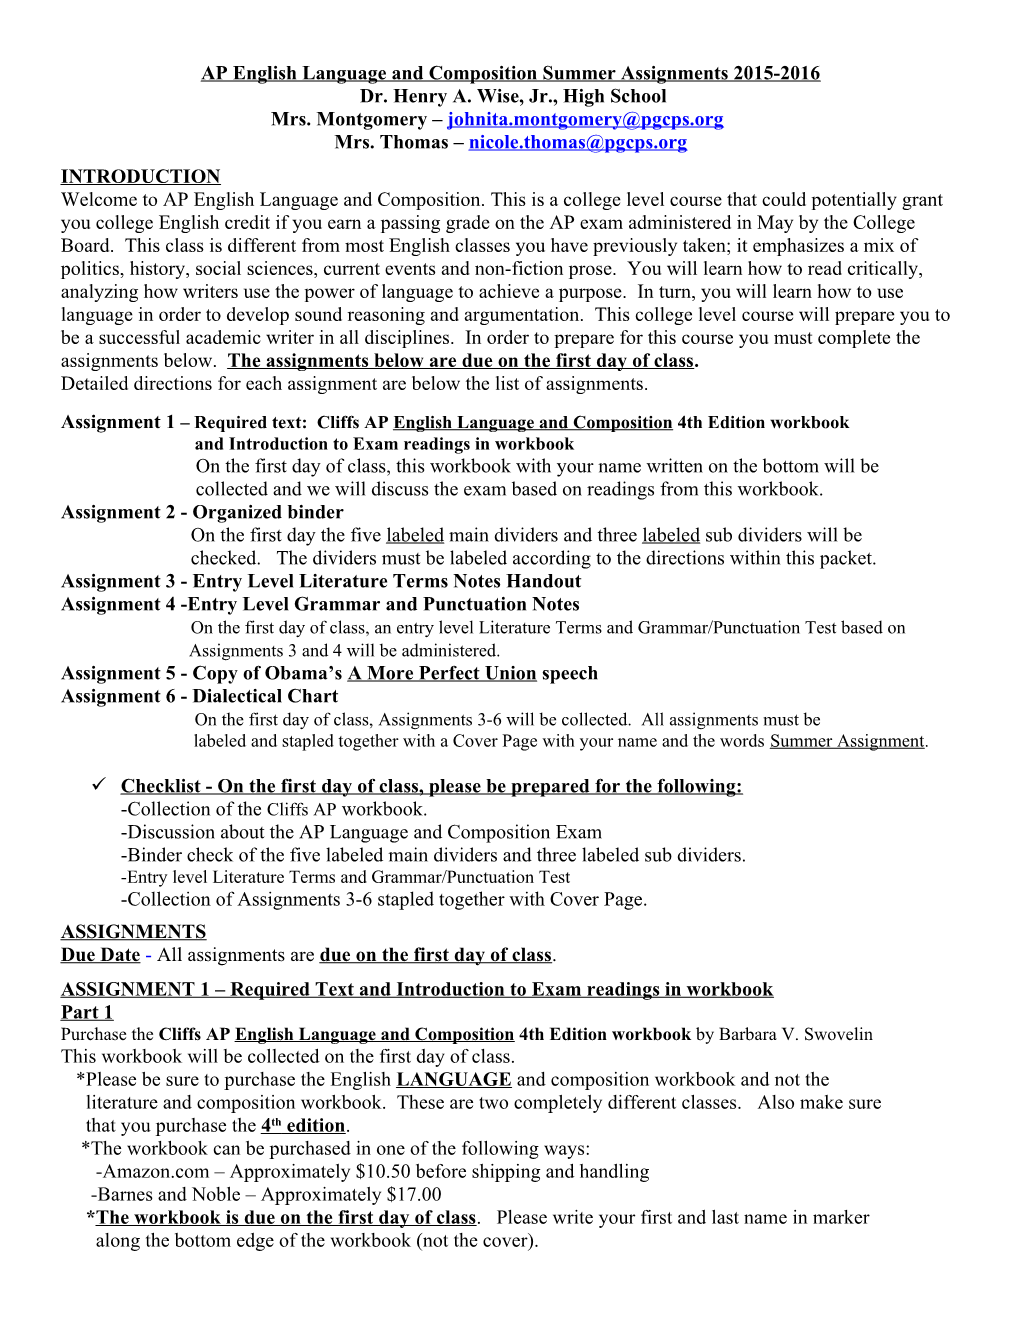 AP English Language and Composition Summer Assignments 2015-2016